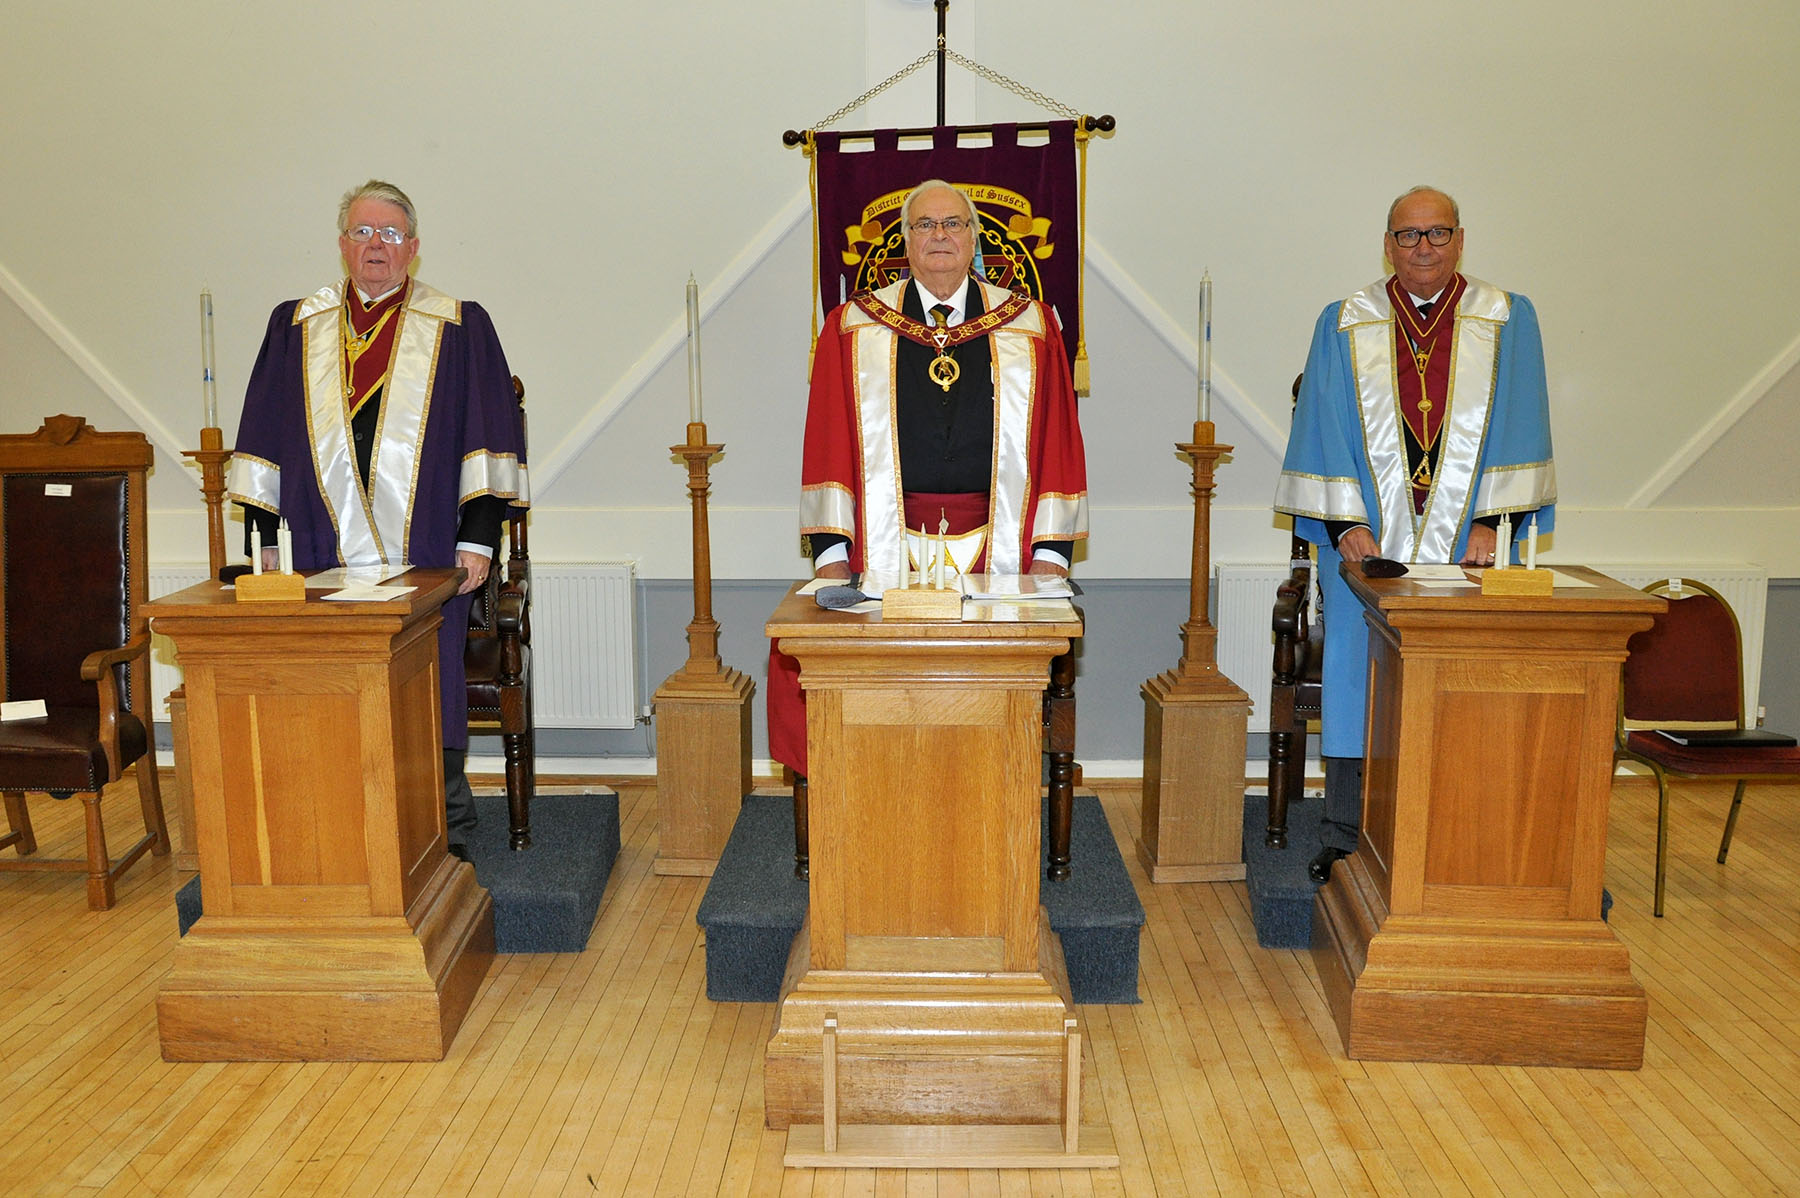 A Visit to the District Grand Council of Sussex